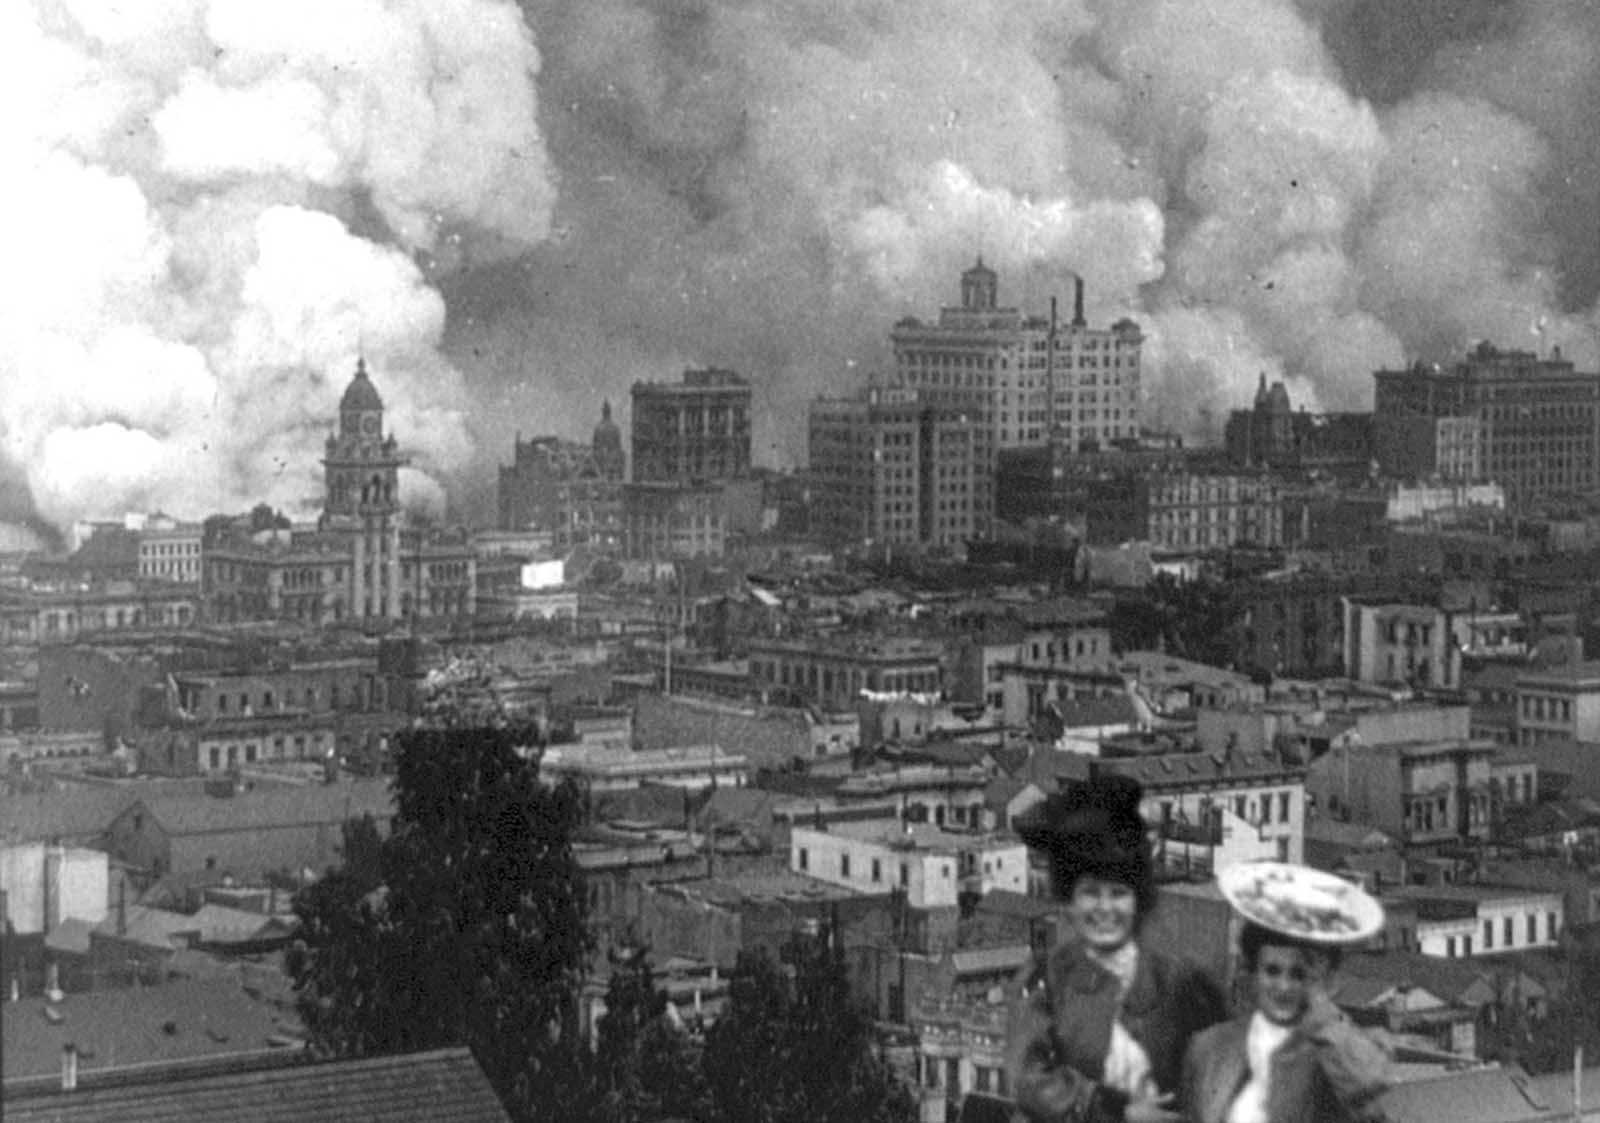 Onlookers pose for a photograph as San Francisco burns in the background on April 18, 1906.